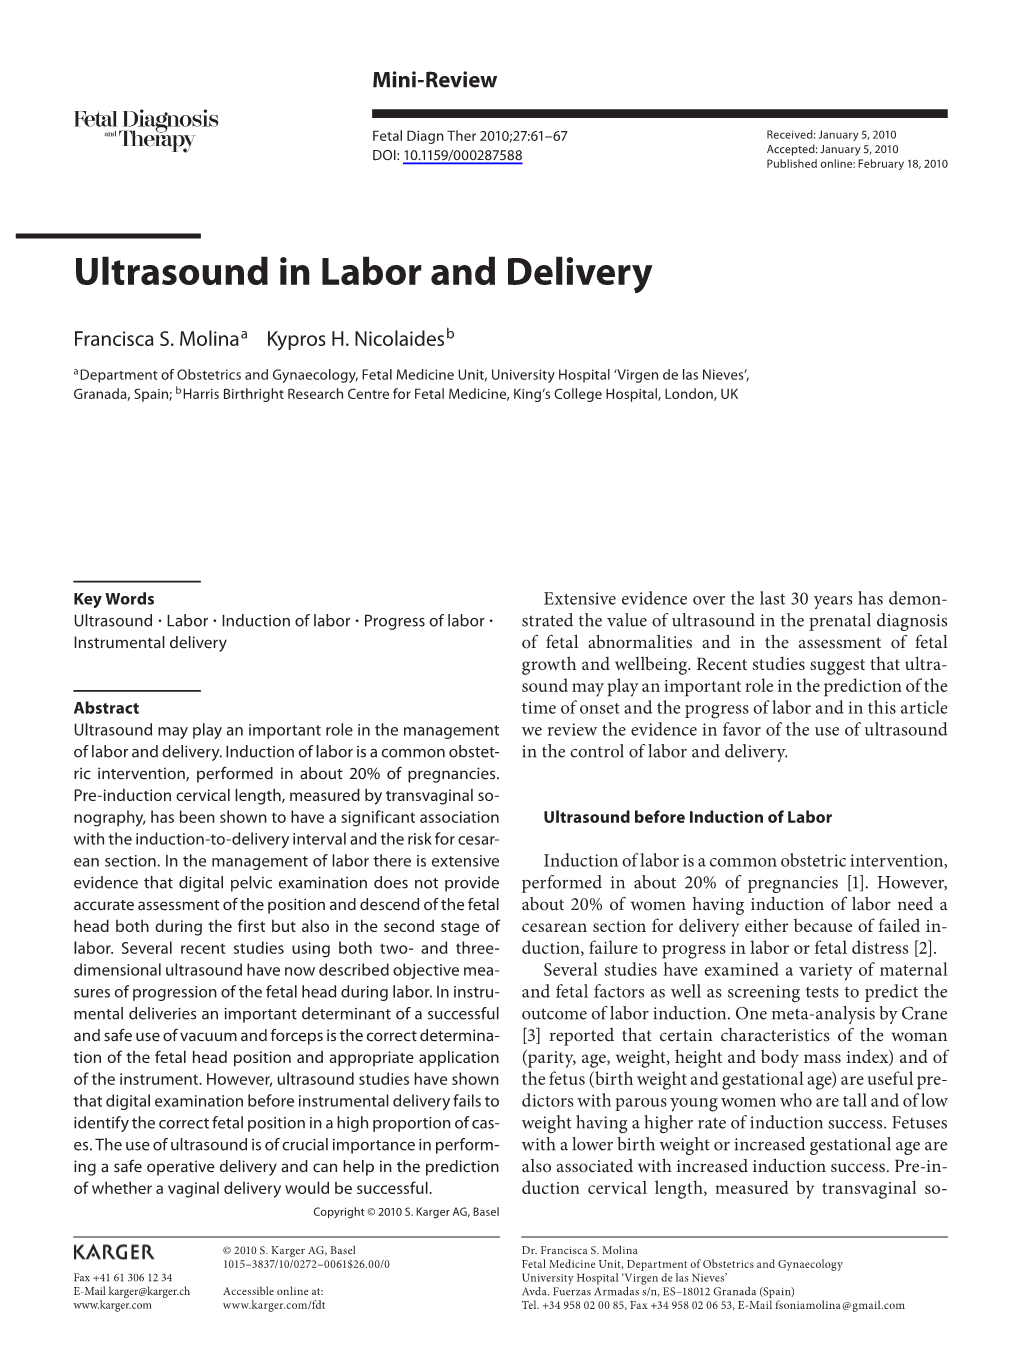 Ultrasound in Labor and Delivery